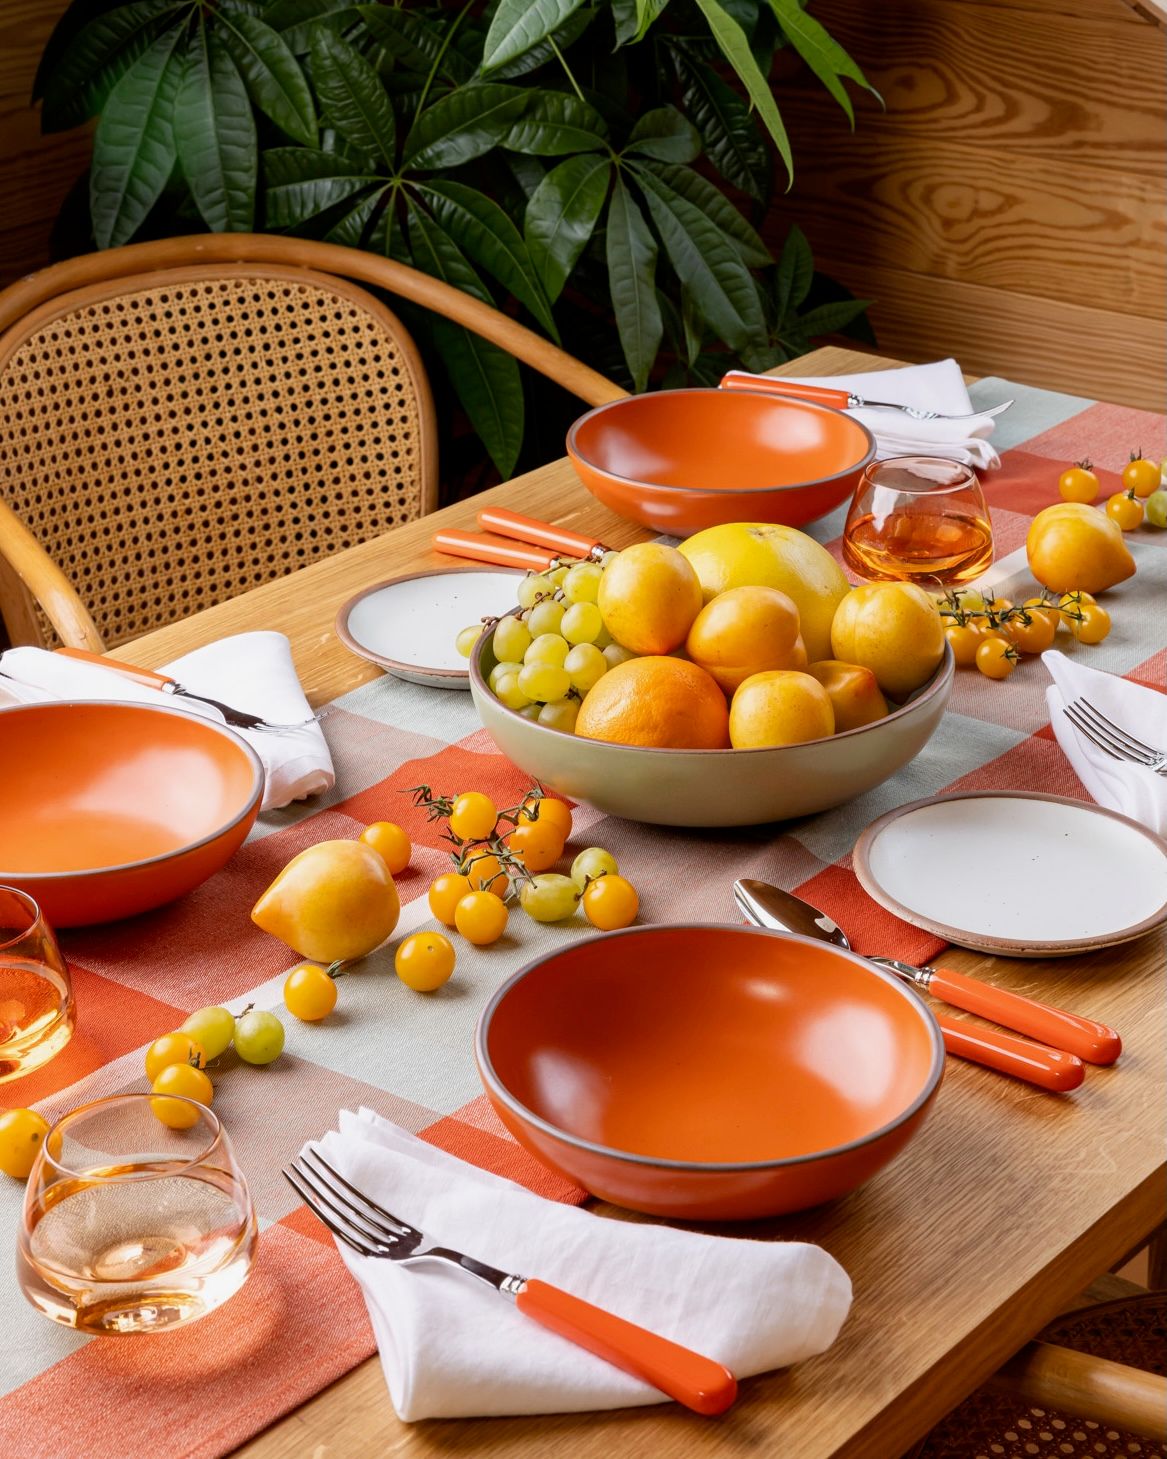 A table filled with several place settings, featuring a shallow dinner bowl in a bold orange, a folded white napkin, orange flatware, whiskey snifters, and a centerpiece filled with fruits and vegetables, all in shades of yellow.